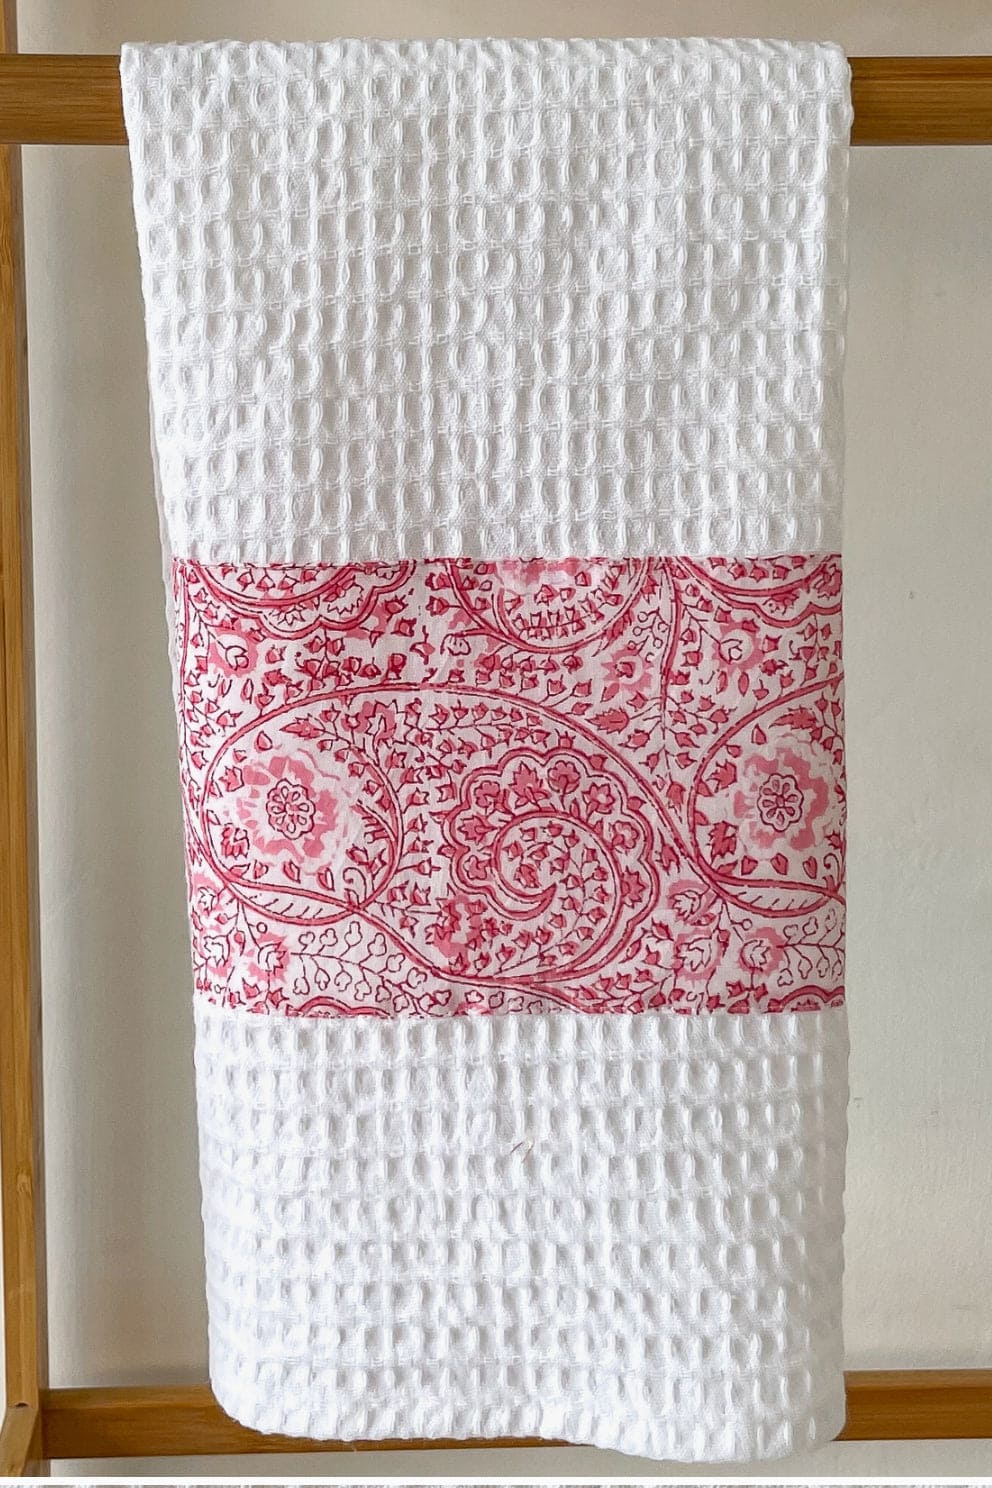 White cotton tea towel decorated with red handblocked pattern.